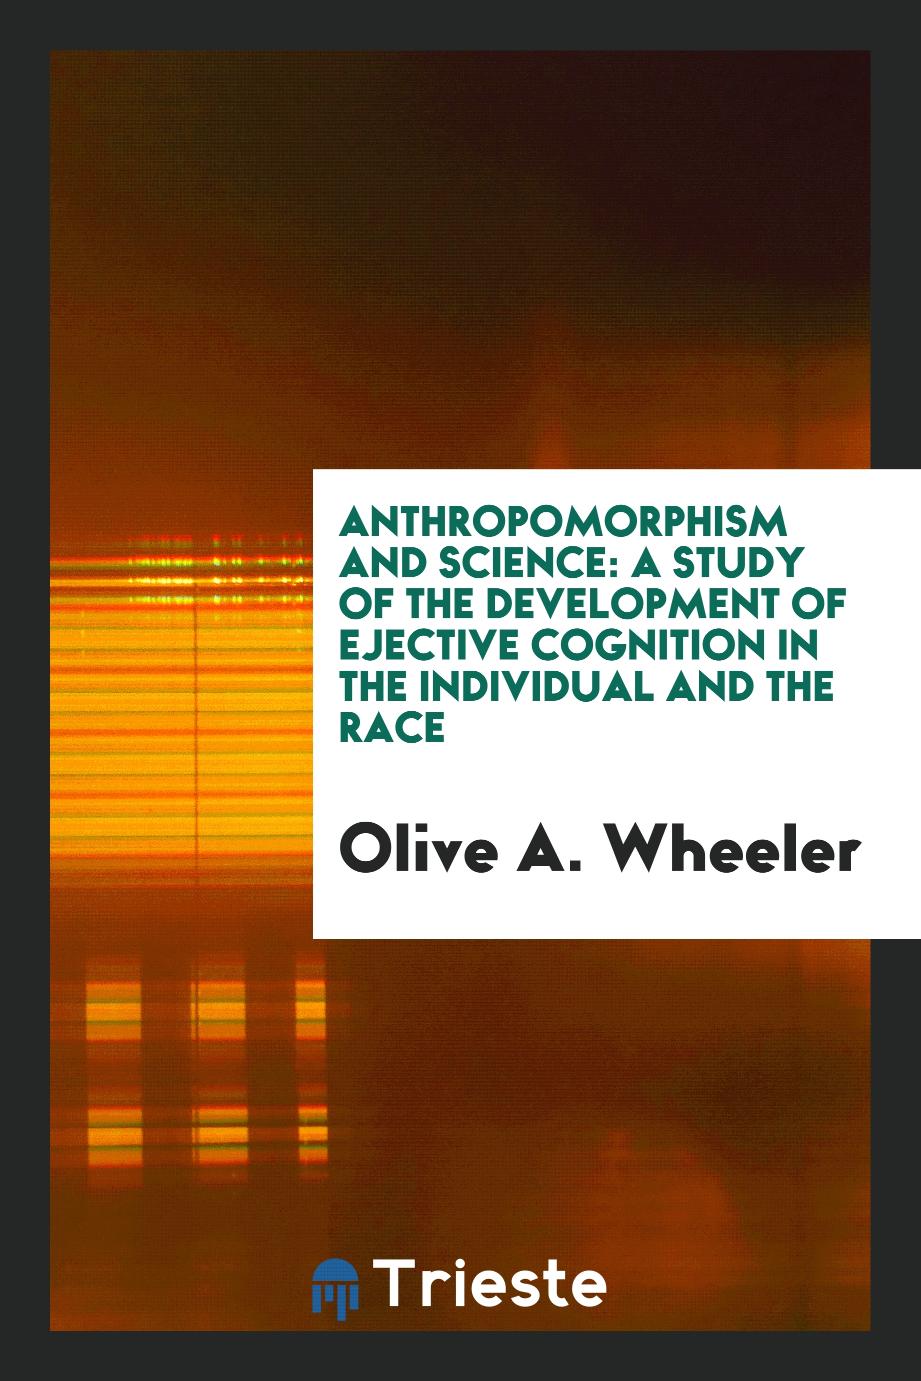 Anthropomorphism and science: a study of the development of ejective cognition in the individual and the race